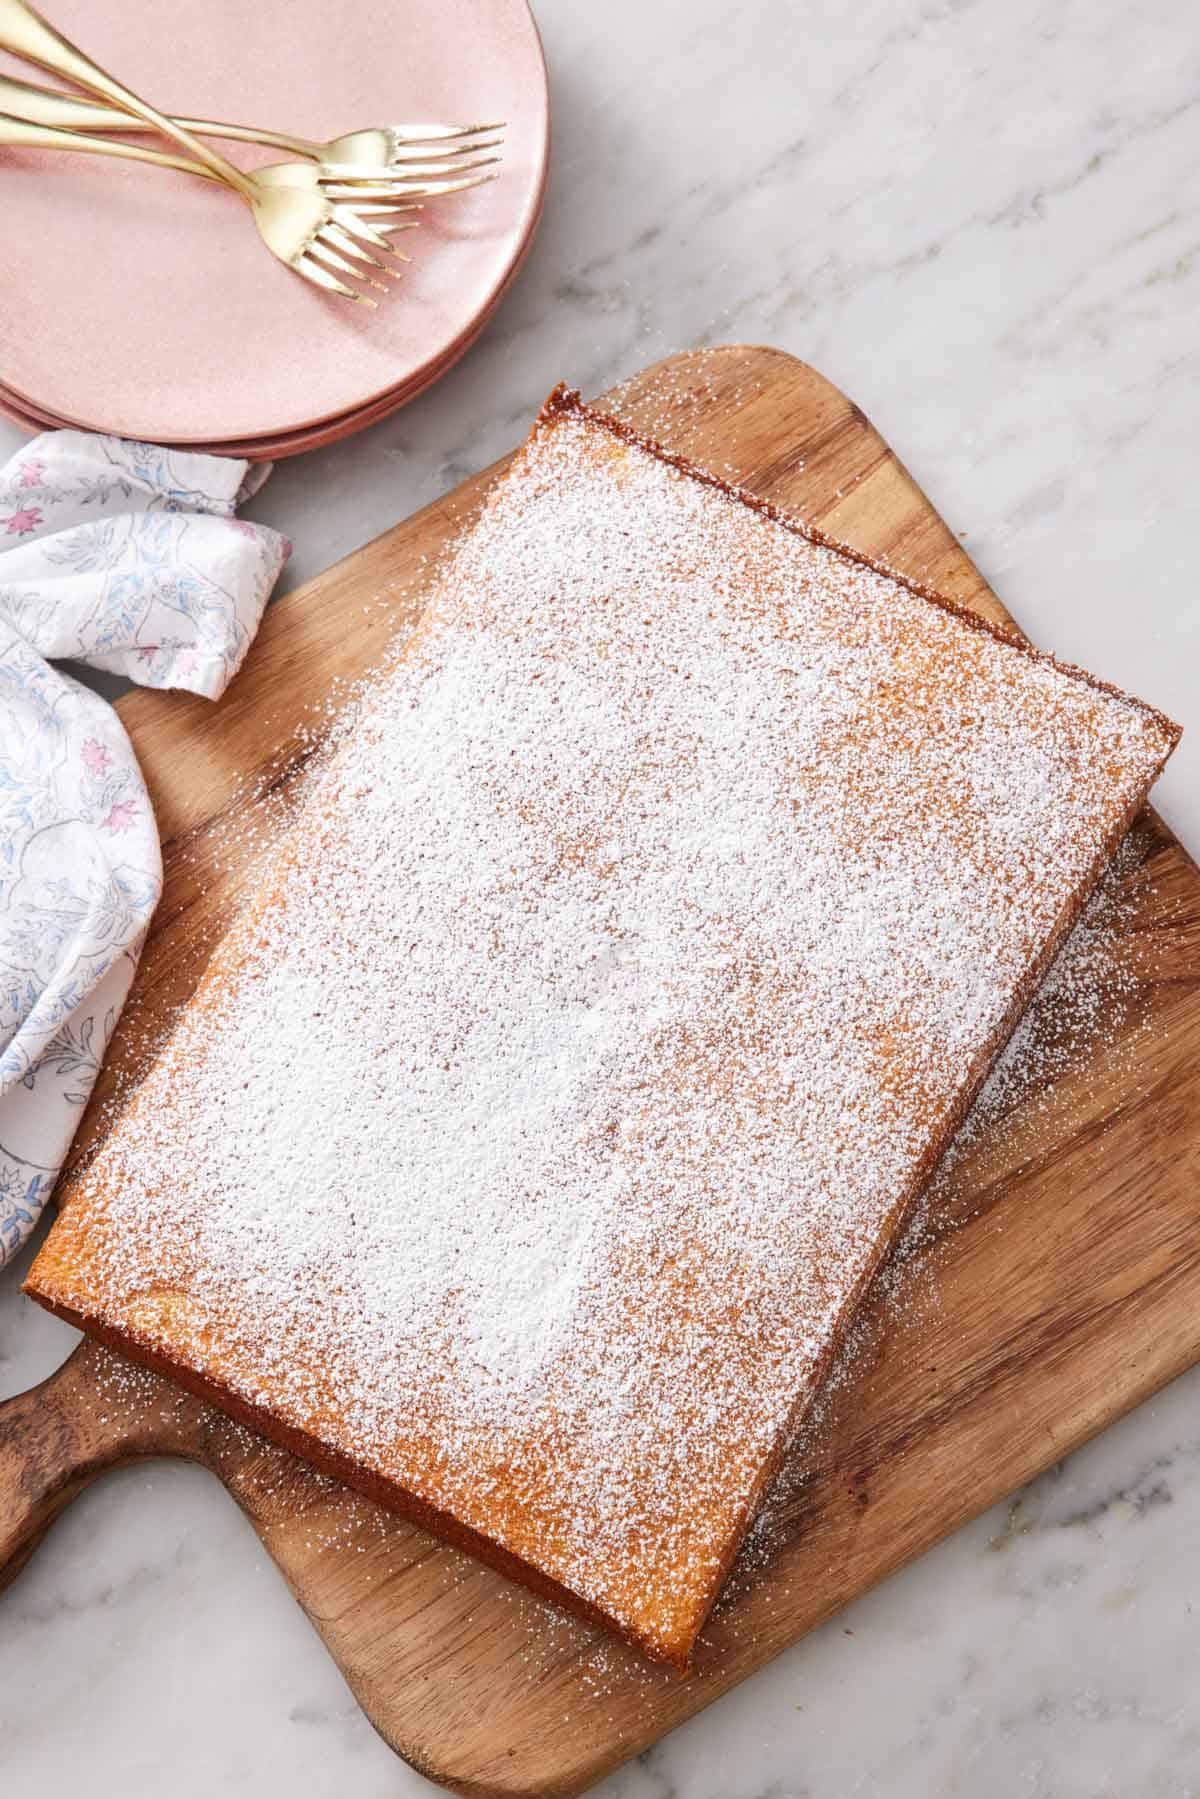 Overhead view of an uncut slab of hot milk cake dusted with powdered sugar on a wooden serving board. Plates and forks on the side.